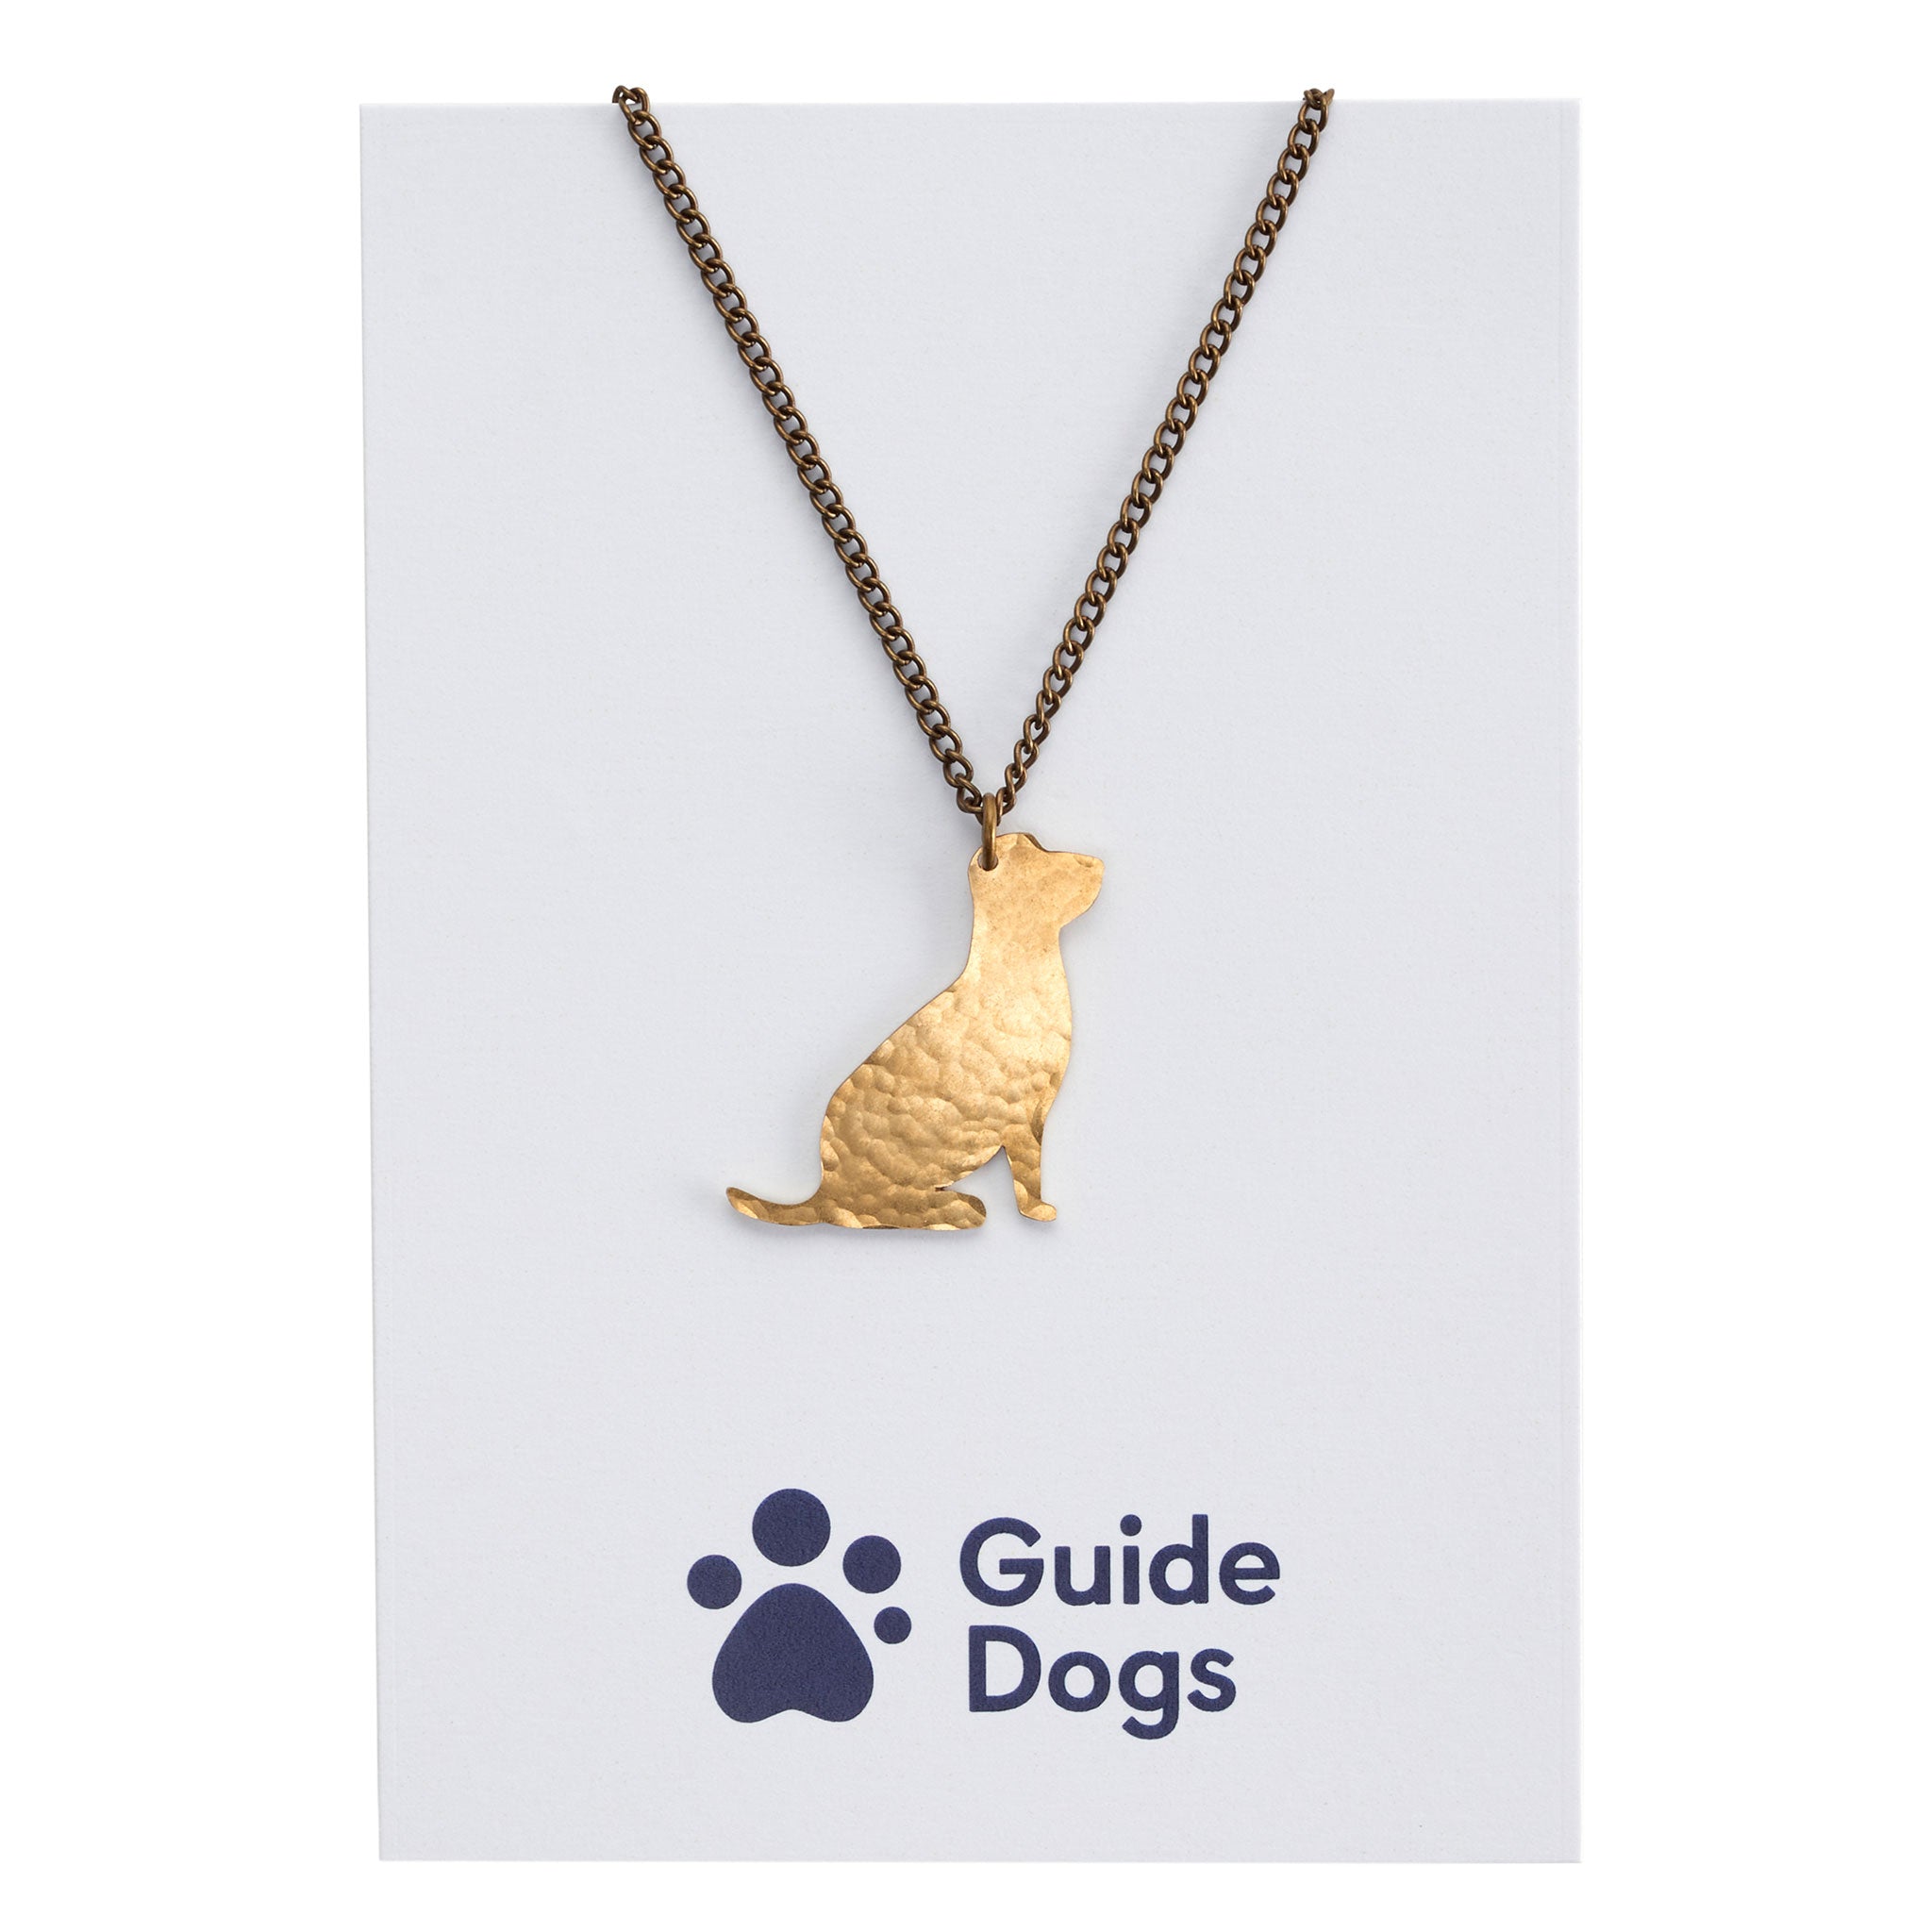 A necklace with a brass sitting dog pendant on Guide Dogs branded packaging.